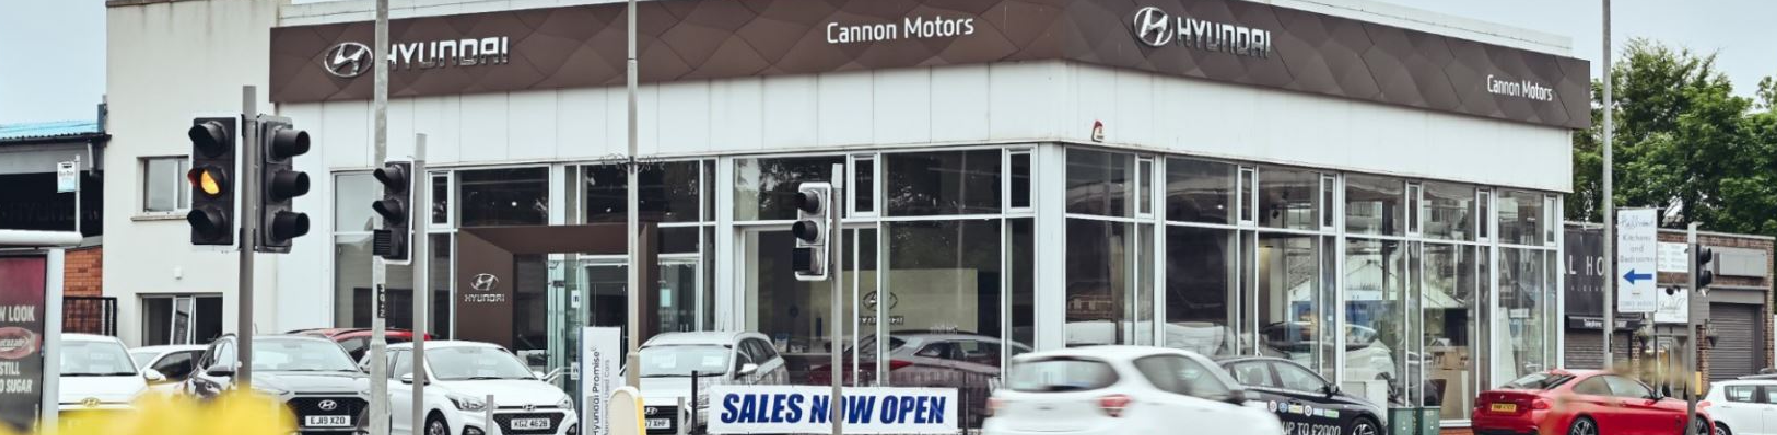 WELCOME TO CANNON MOTORS